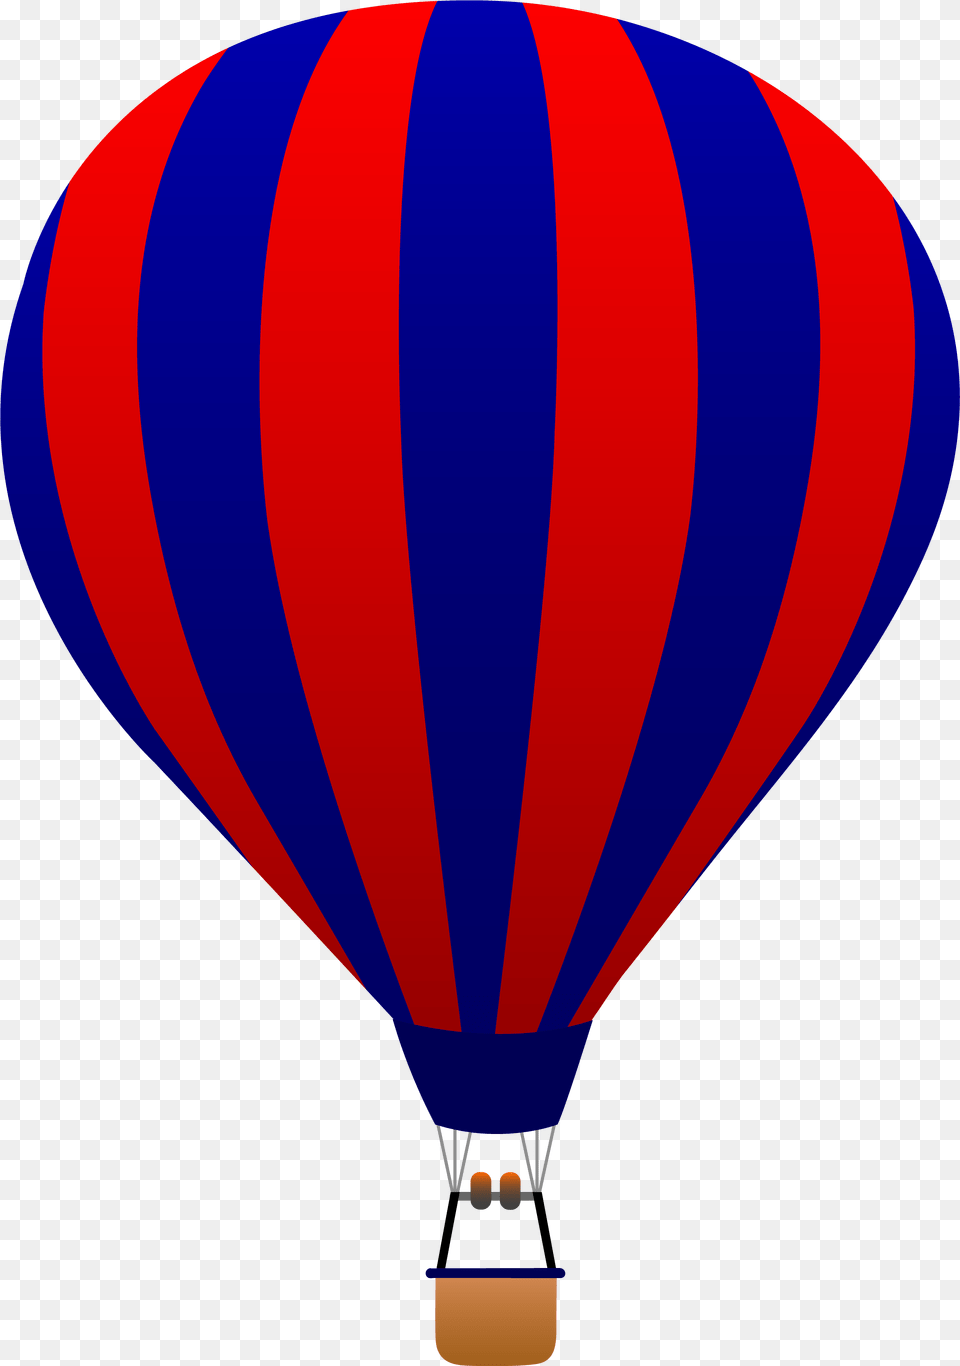 Hot Air Balloon Clipart Black And White Hot Air Balloon Cartoon, Aircraft, Hot Air Balloon, Transportation, Vehicle Free Transparent Png